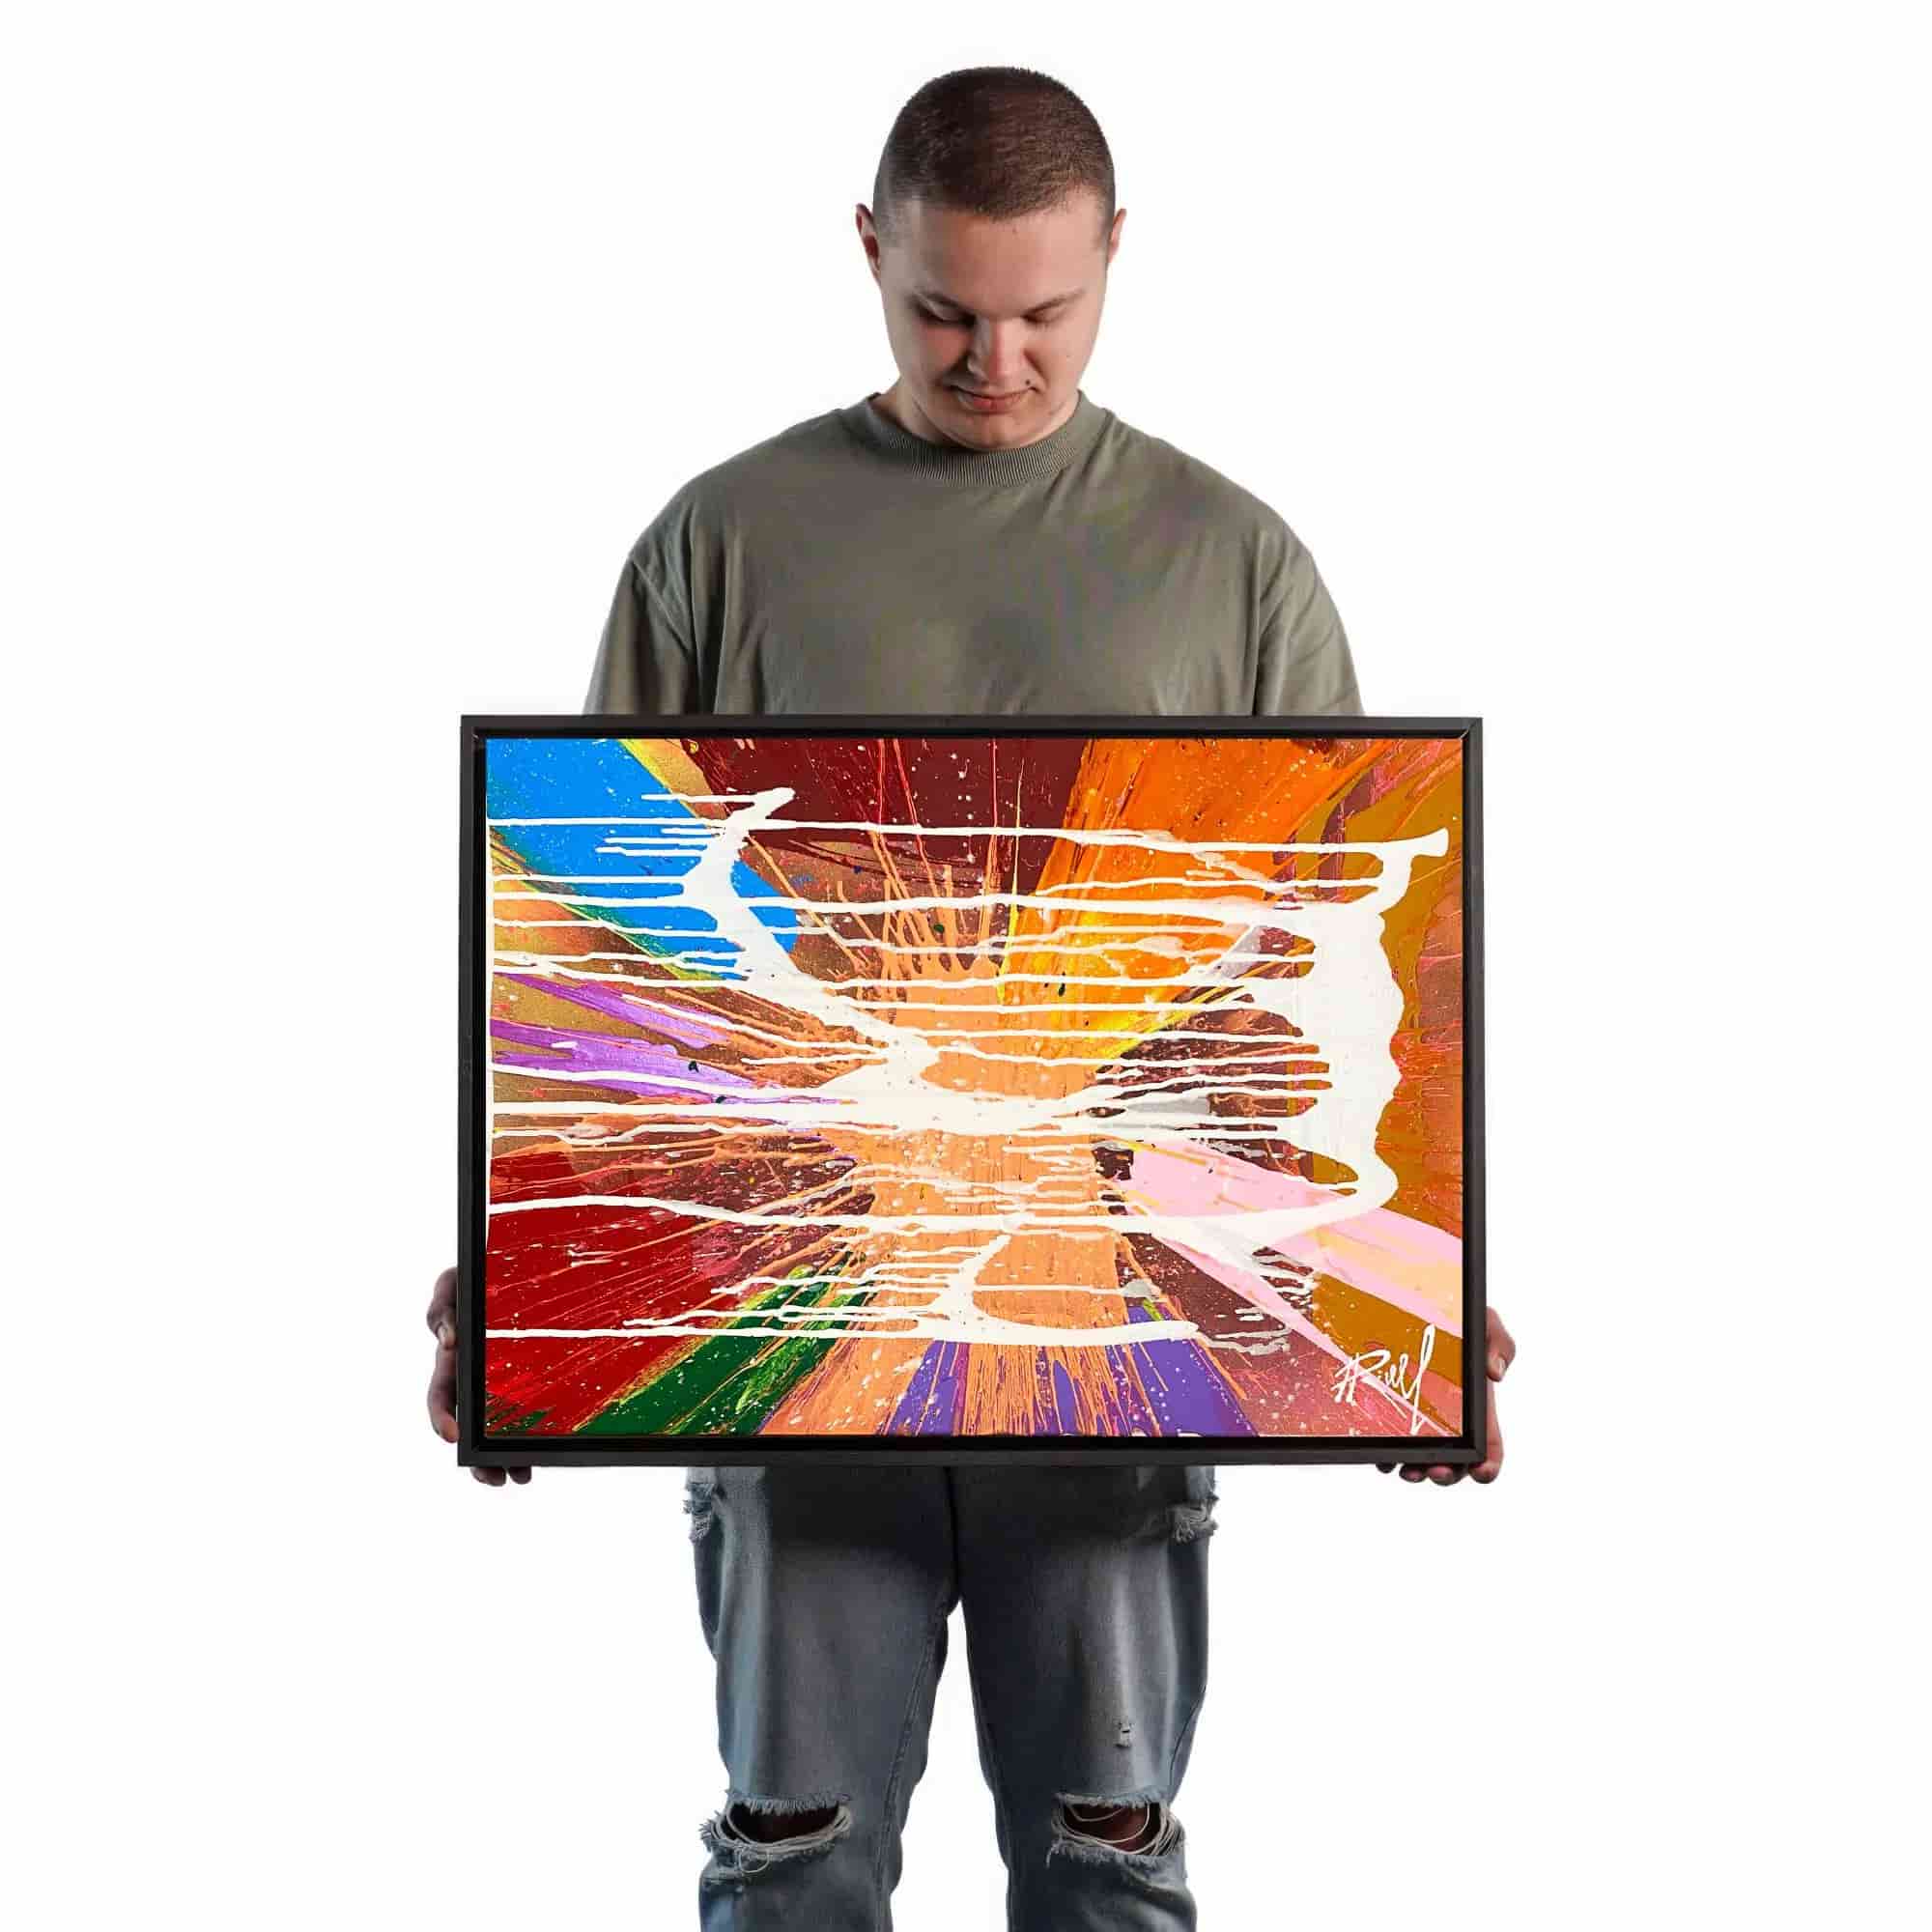 Art connoisseur presents the tangible dimensions of the spin art painting crafted with acrylic paints on Italian canvas, offering a vivid painting style comparison for art enthusiasts.